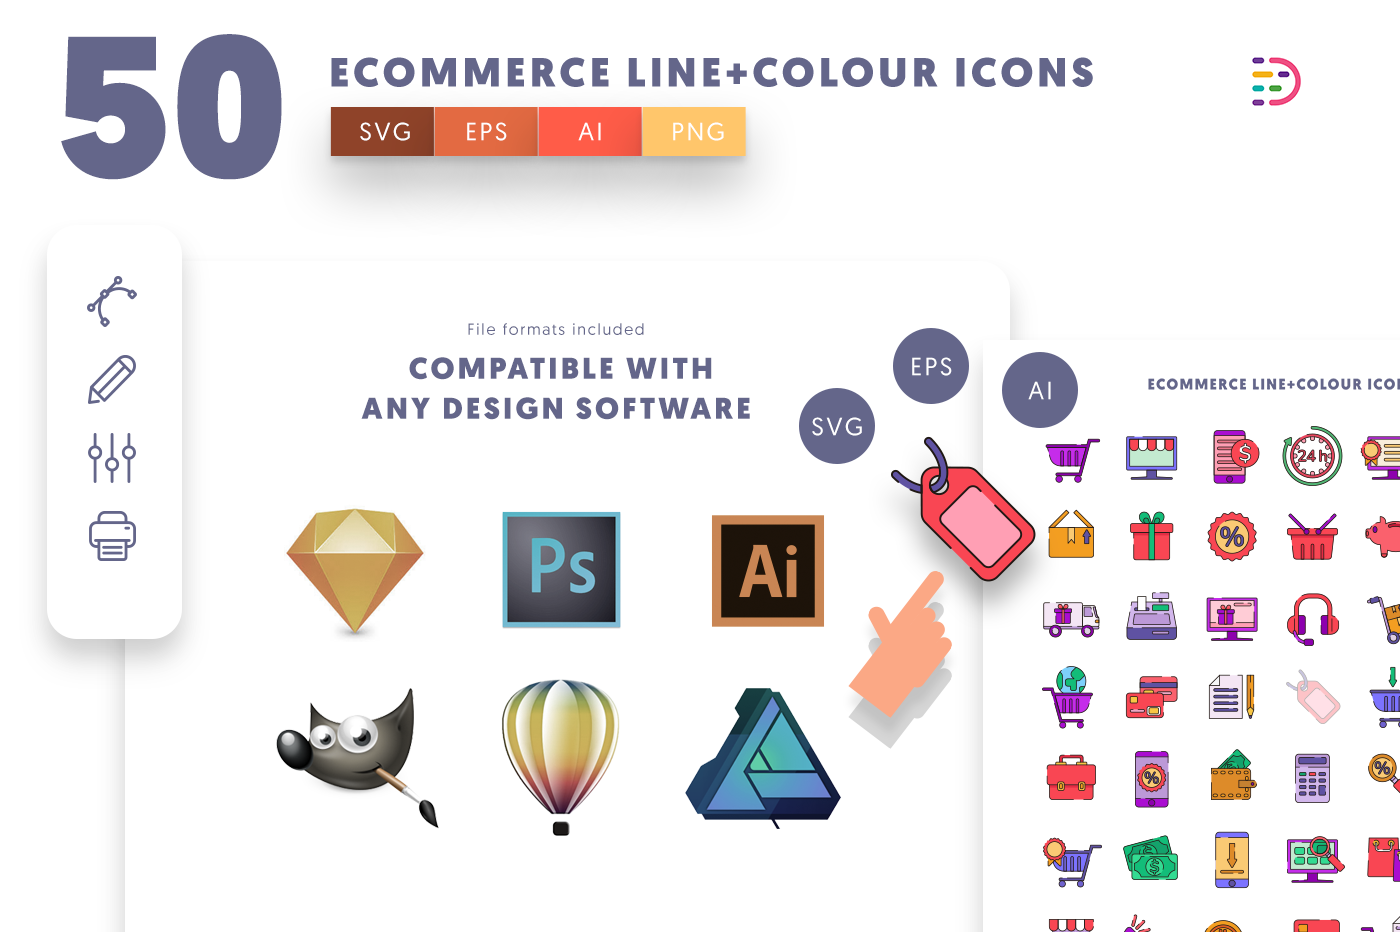  full vector 50 Ecommerce Line+Colour Icons EPS, SVG, PNG